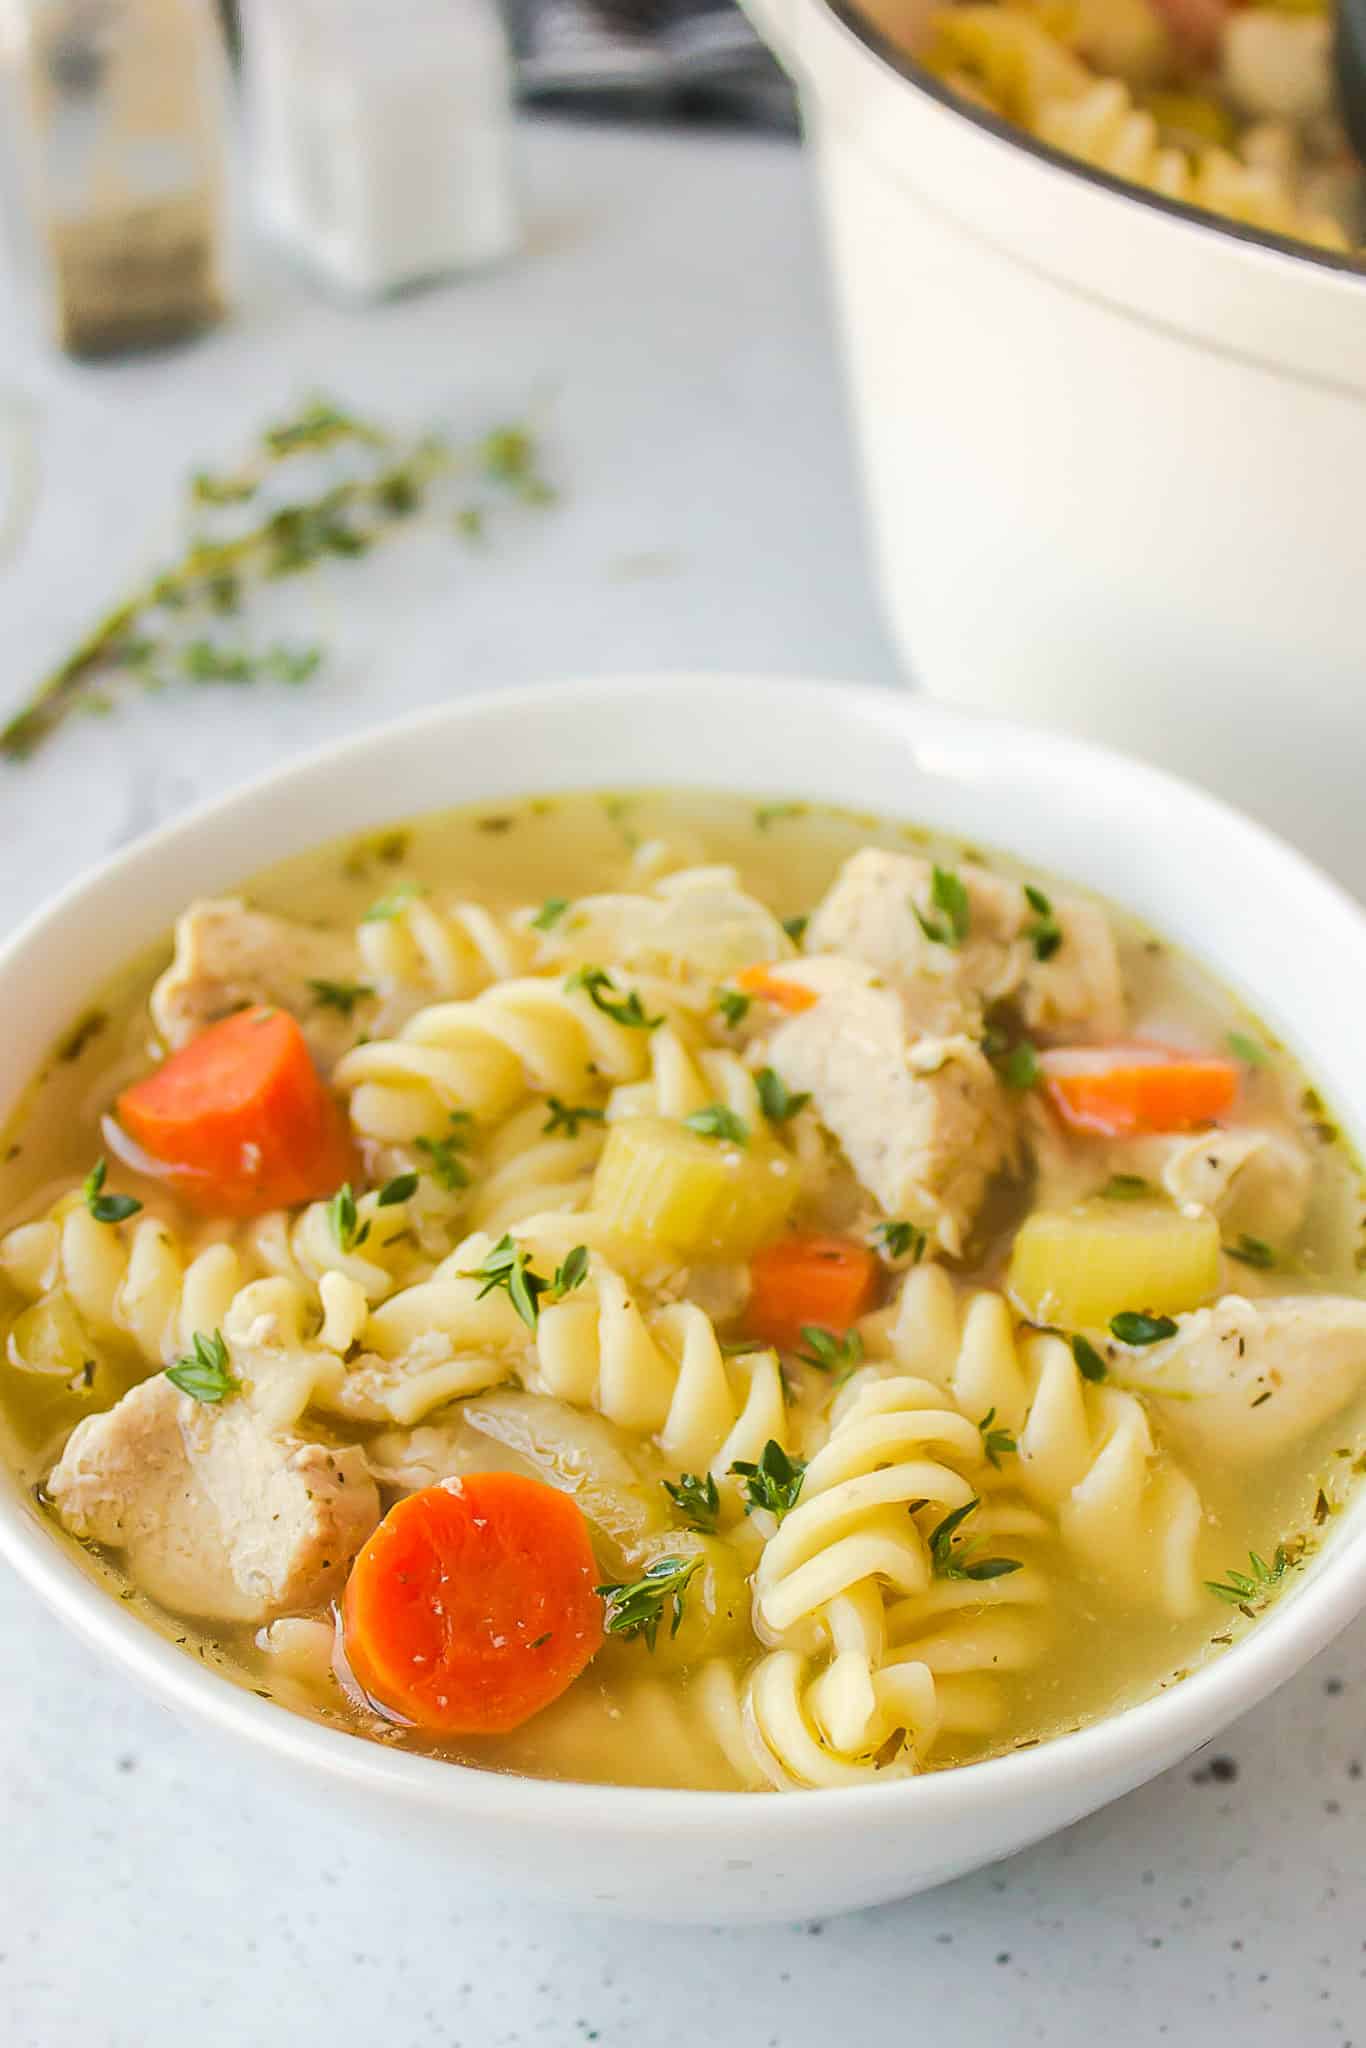 https://www.cleaneatingkitchen.com/wp-content/uploads/2021/11/panera-chicken-noodle-soup-hero-scaled.jpg